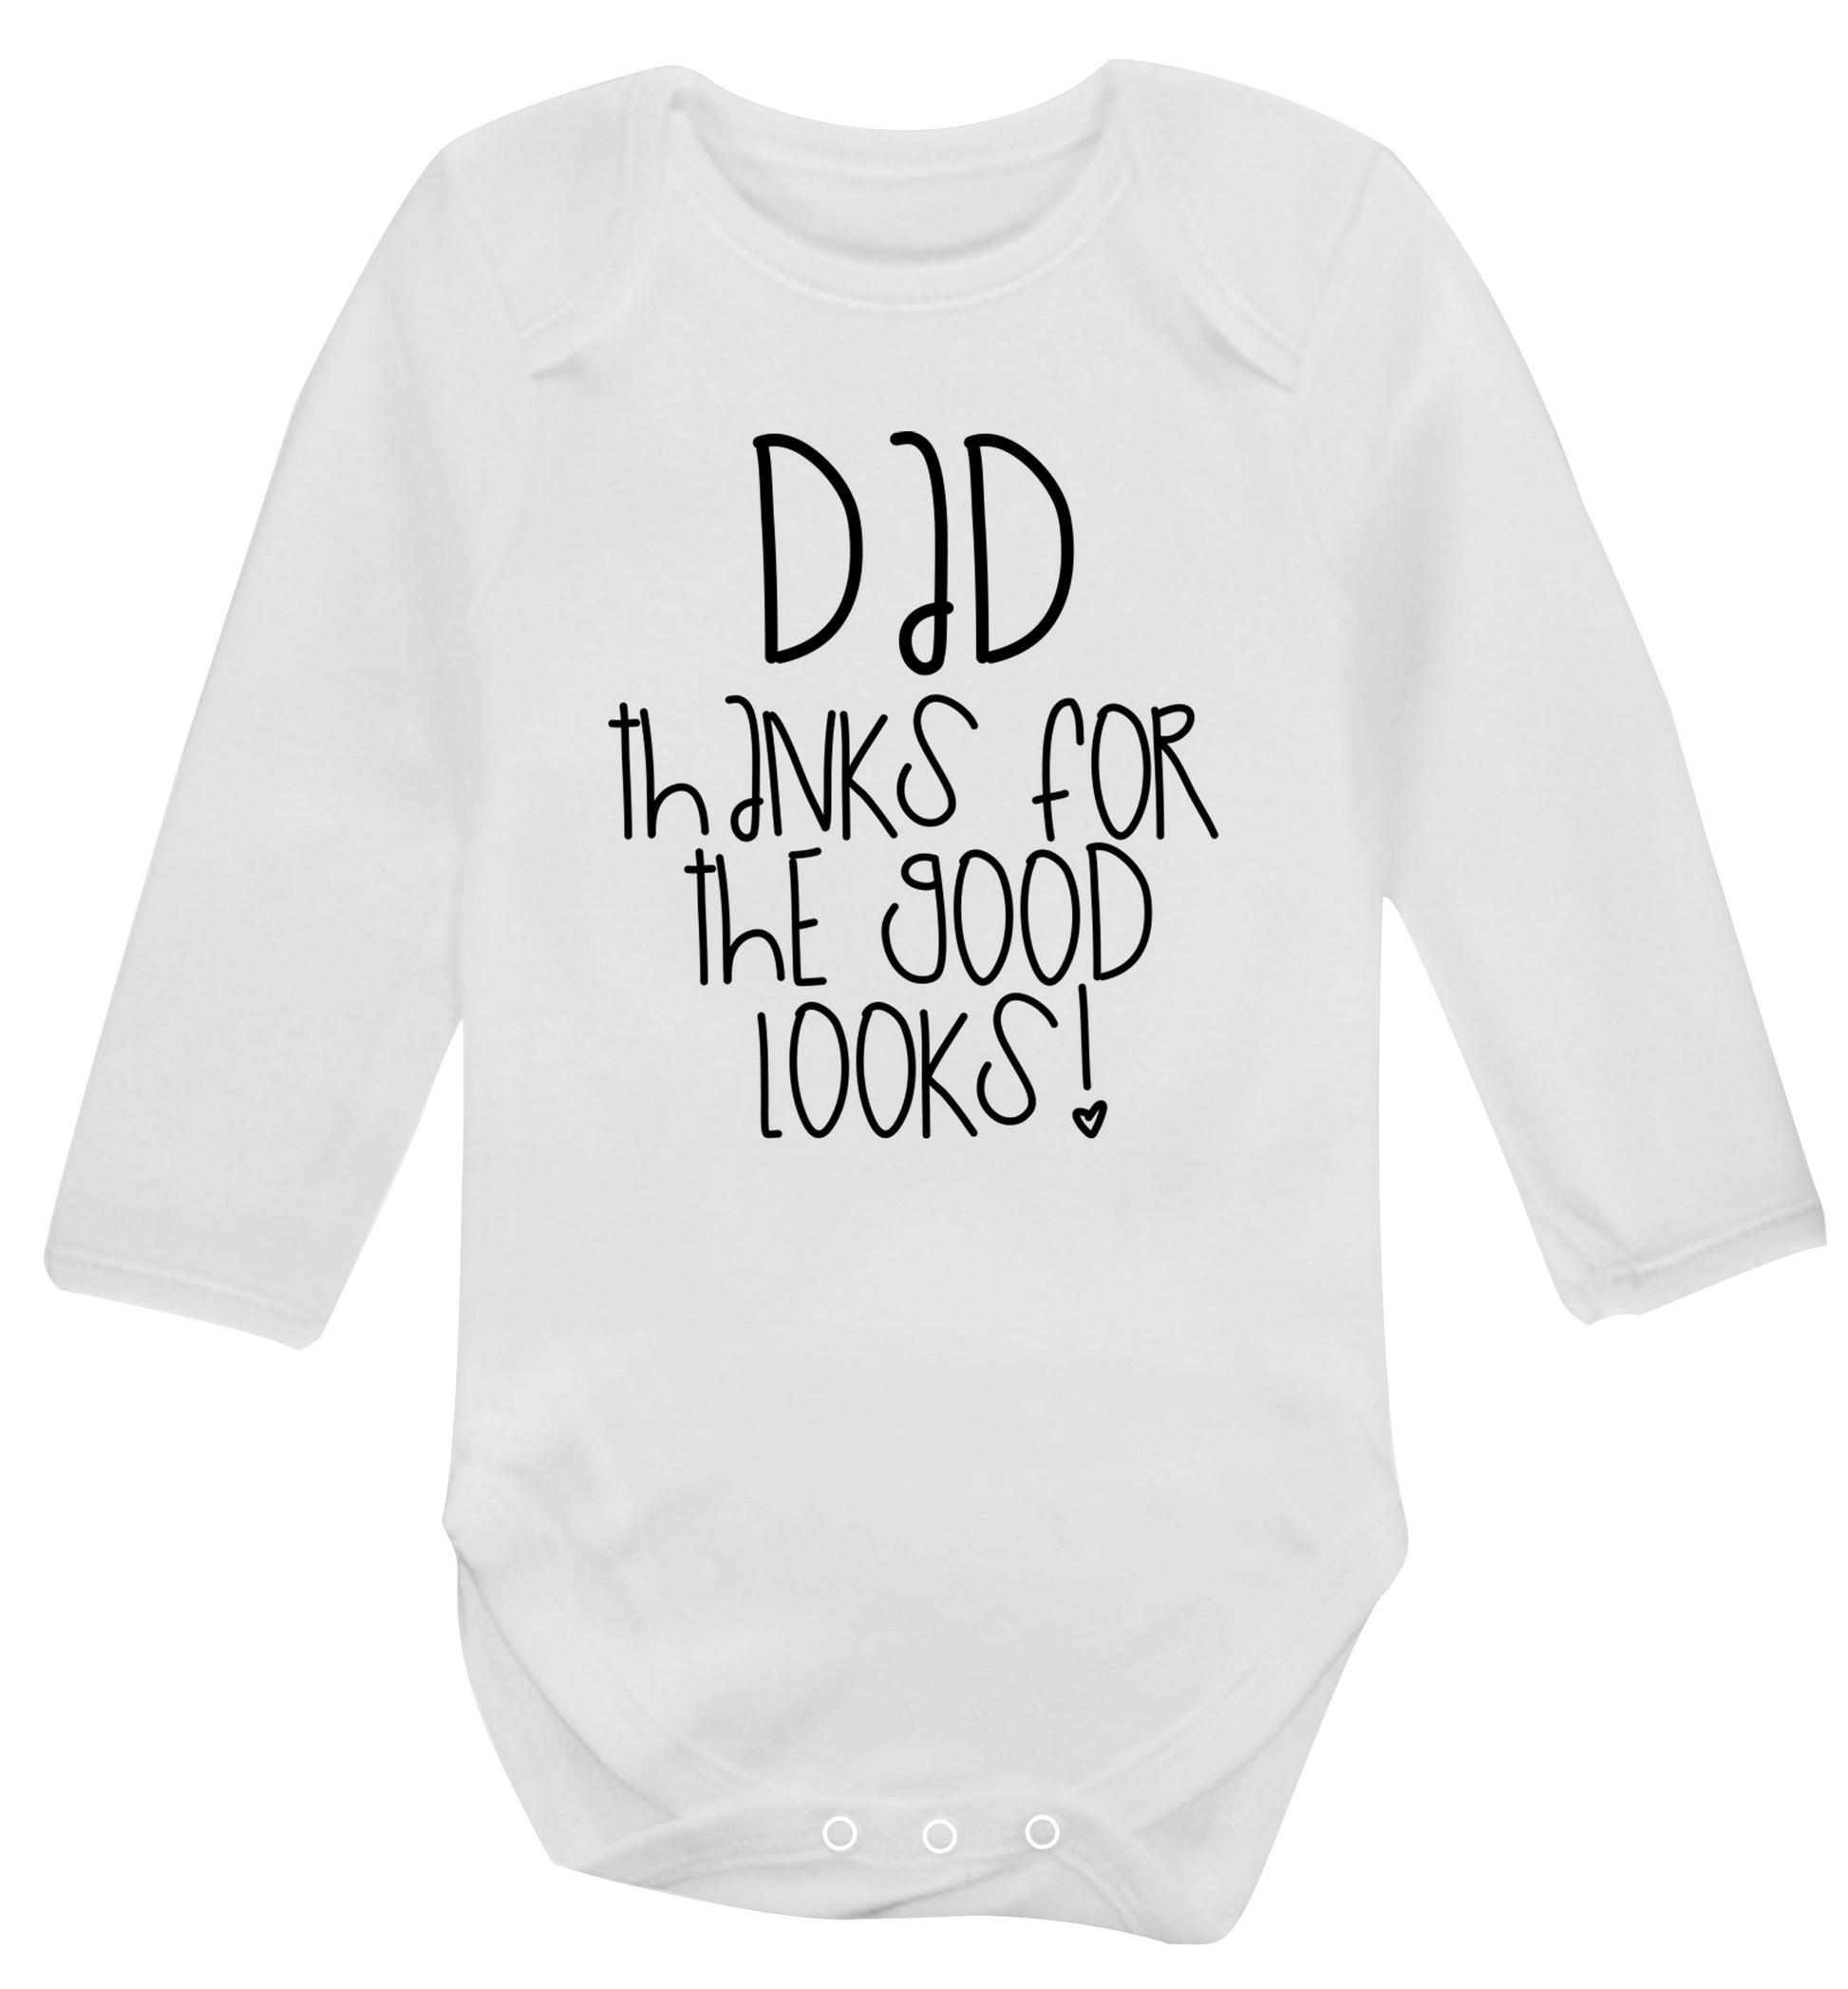 Dad thanks for the good looks Baby Vest long sleeved white 6-12 months